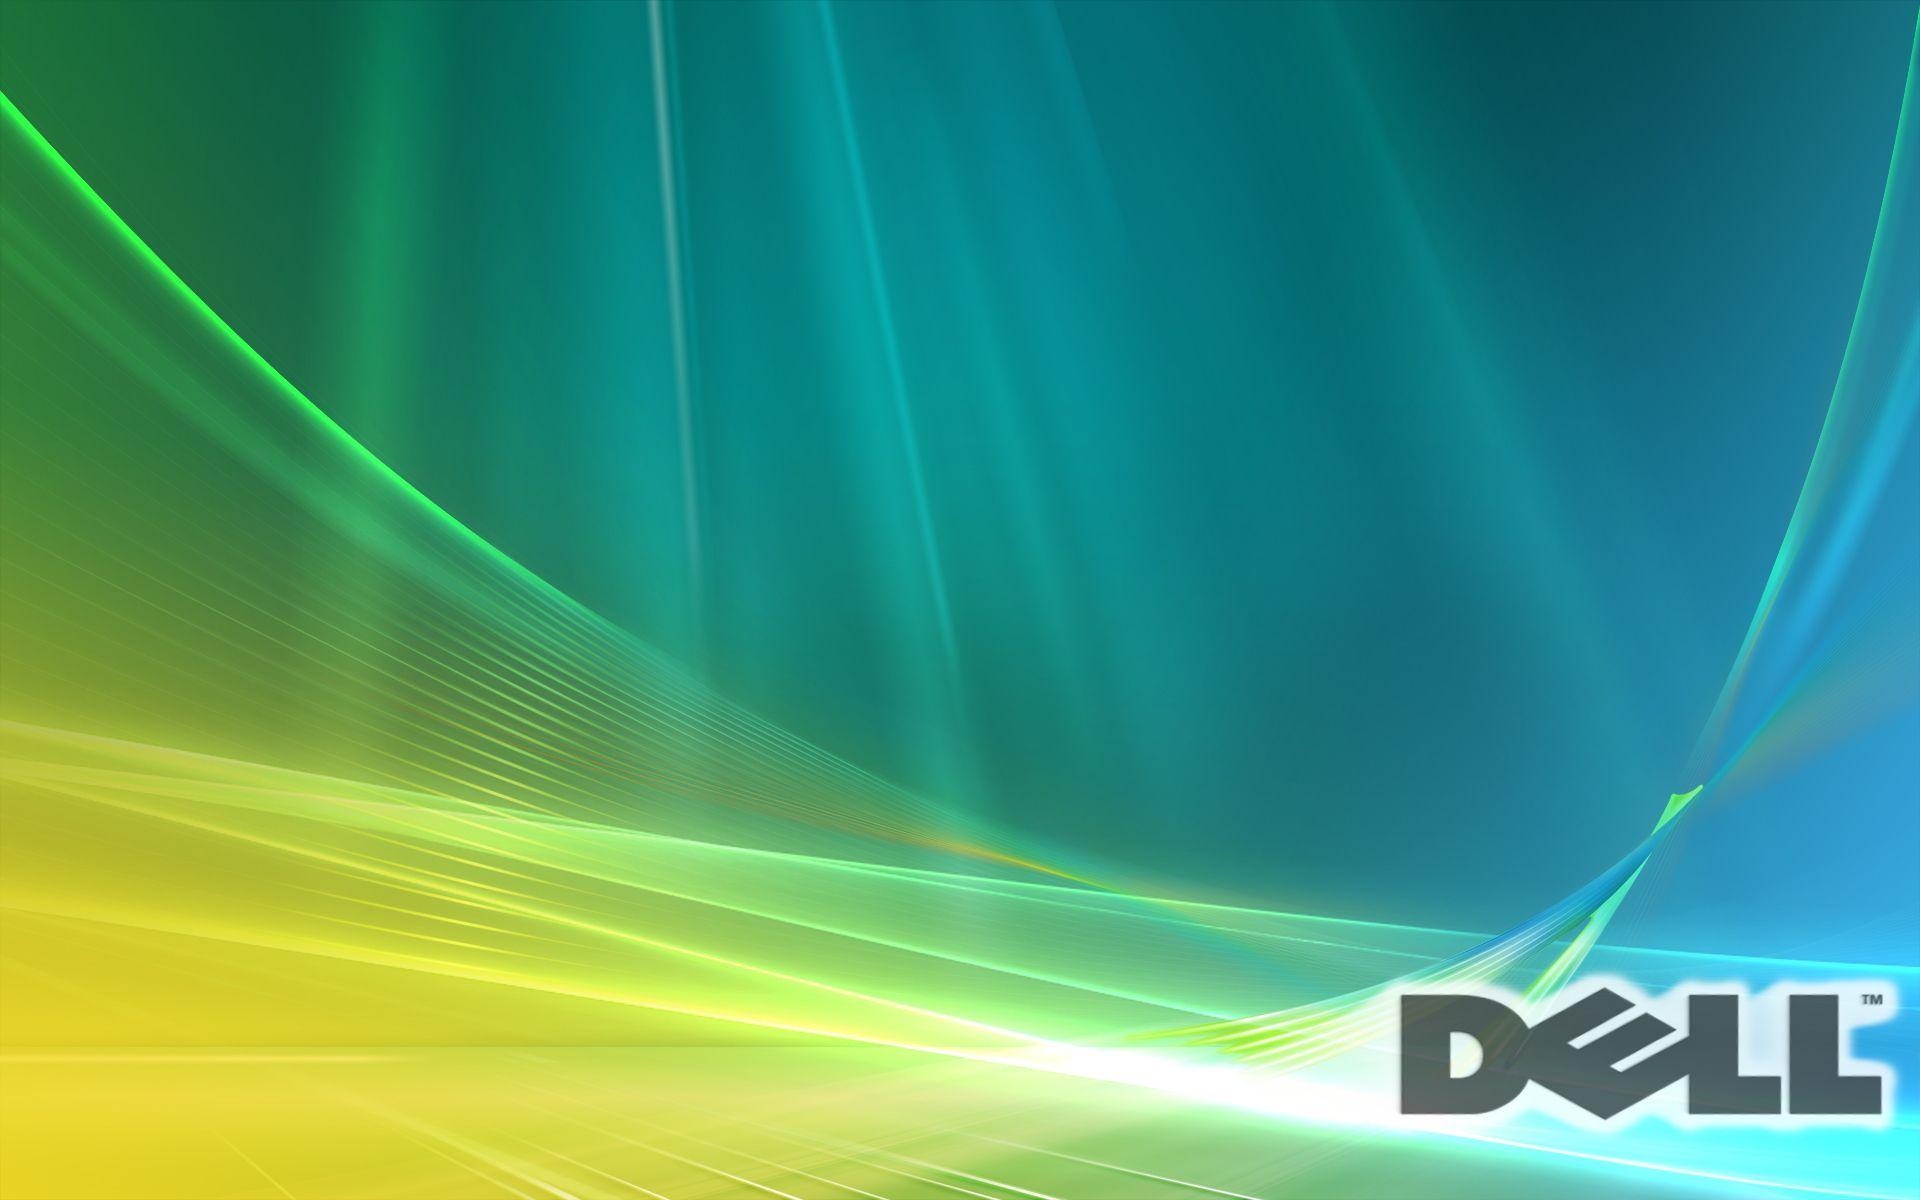 Top Ranked Dell Wallpaper, PC AMZ HD Quality